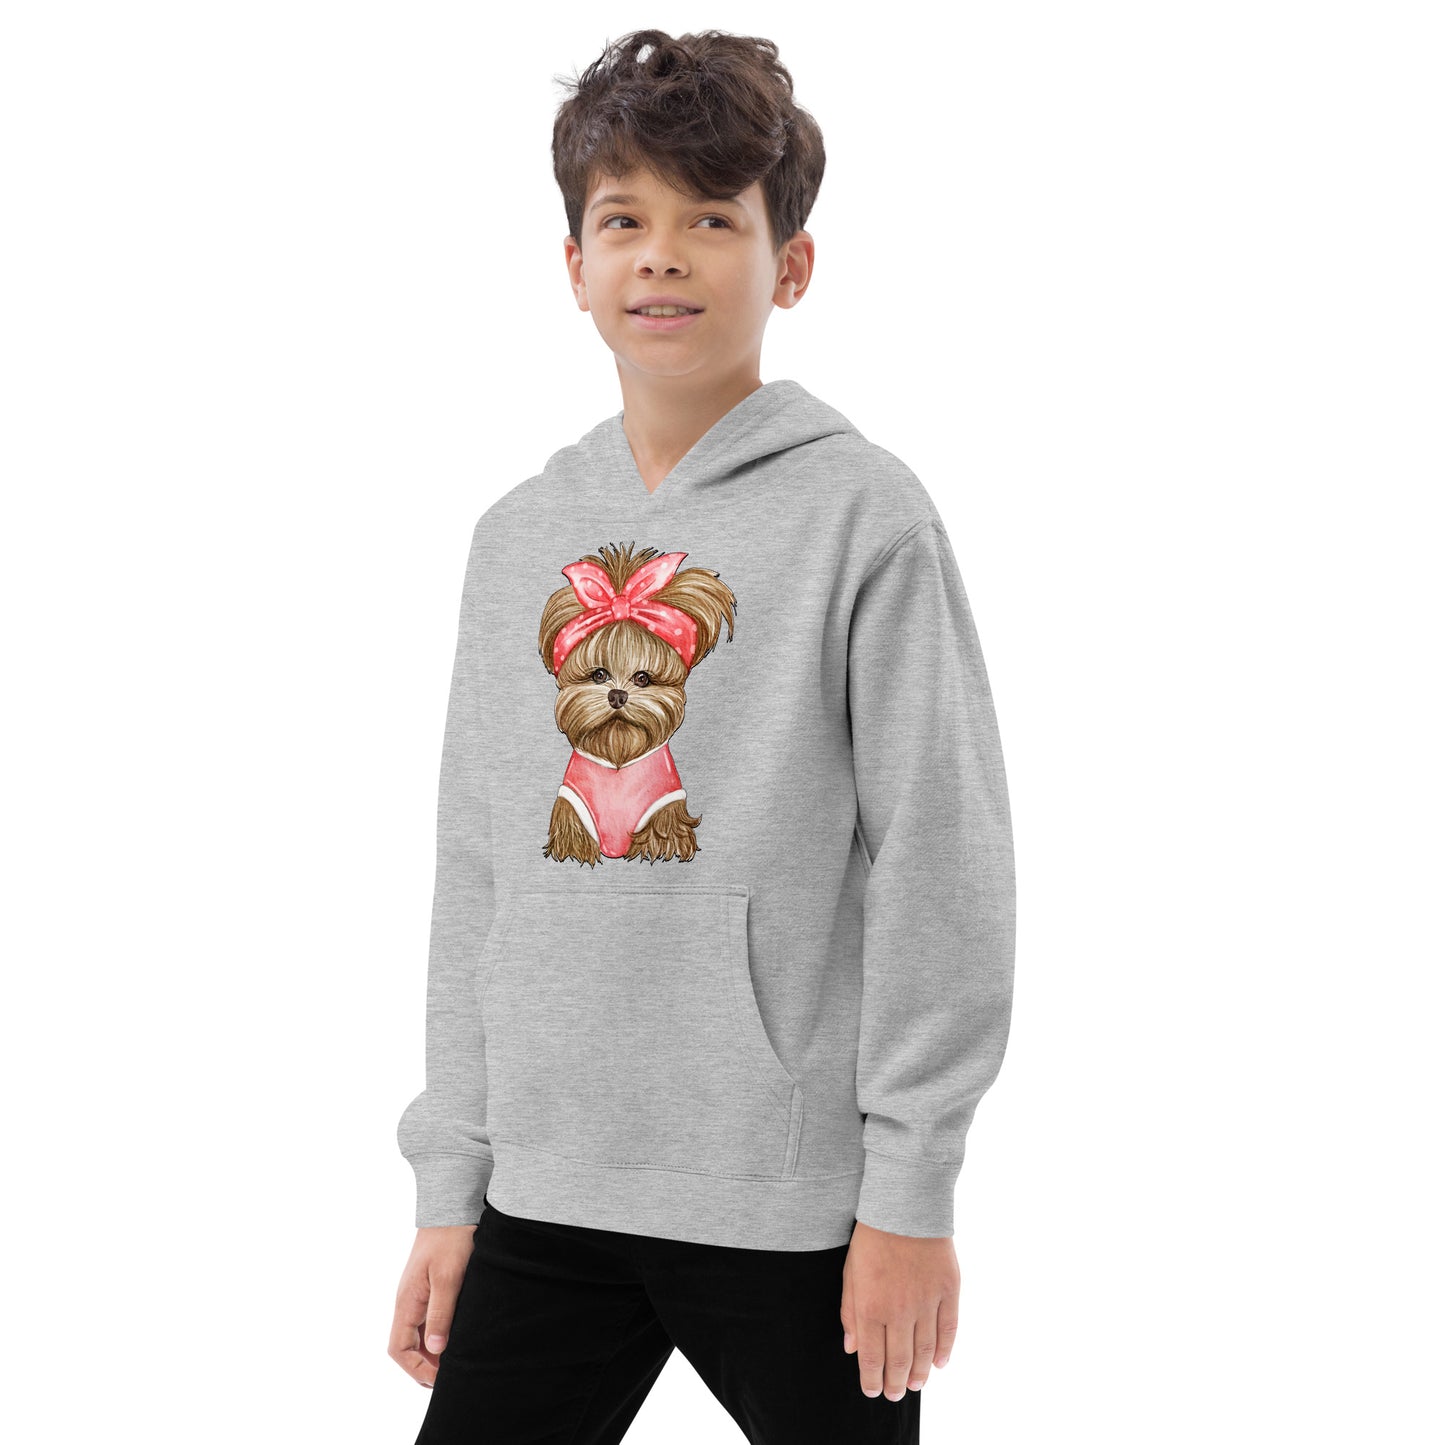 Adorable Dog with Red Ribbon Hoodie, No. 0566